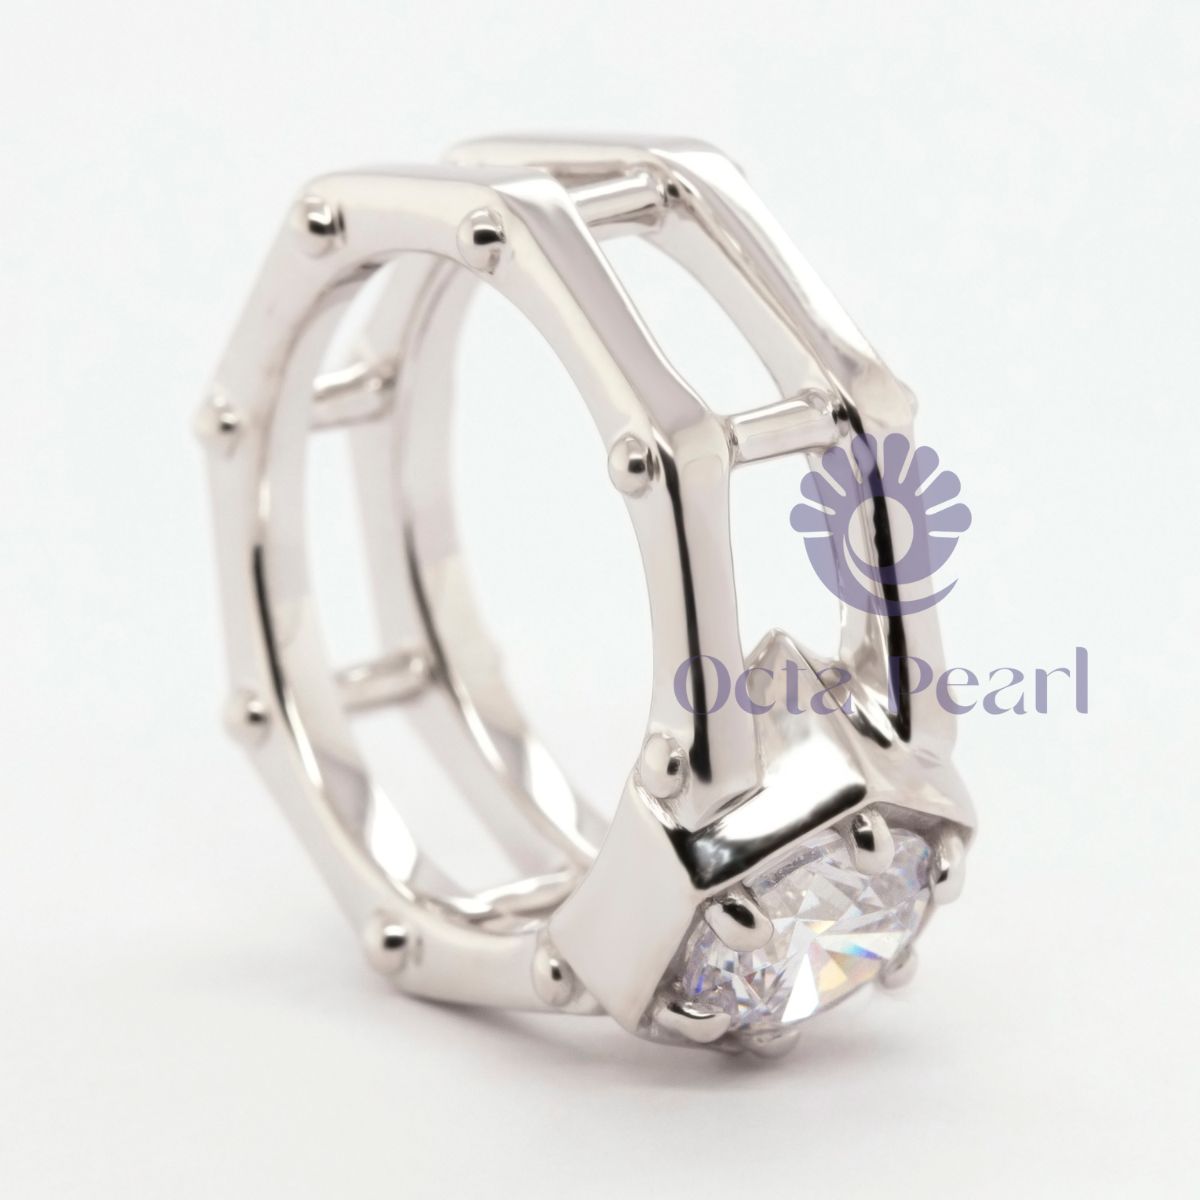 Round Moissanite Octagon Shape Solitaire Ring